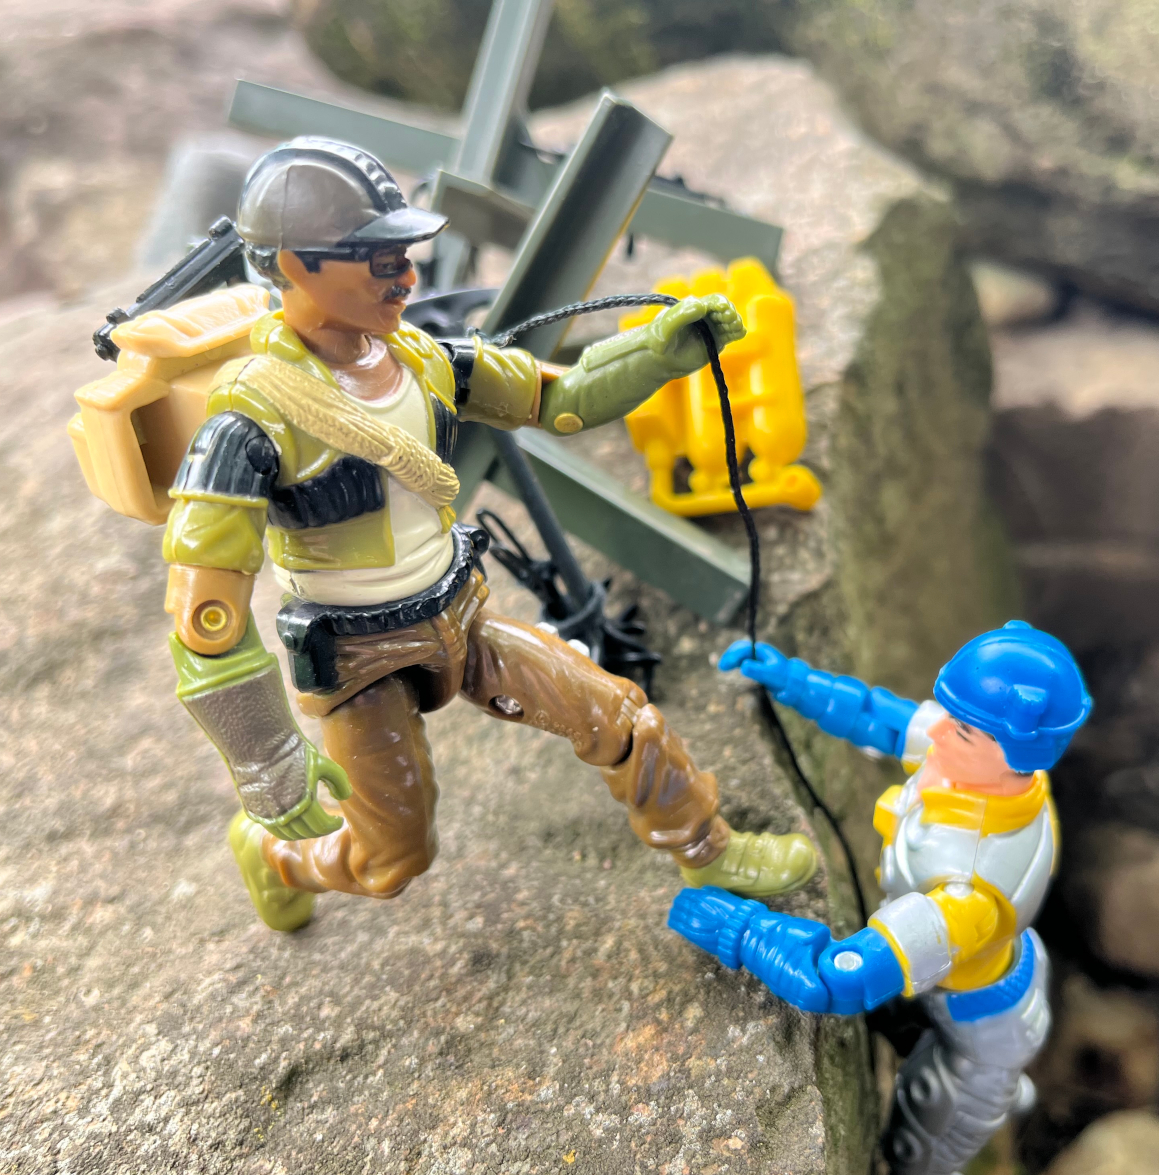 ARAH Gallery Theme Week! Show #GIJoe Twitter your Alpine shots, any and every! Just make sure to tag me so I see 'em! Here's one from @forgottenfigur1 arahgallery.com/index.php?acti…